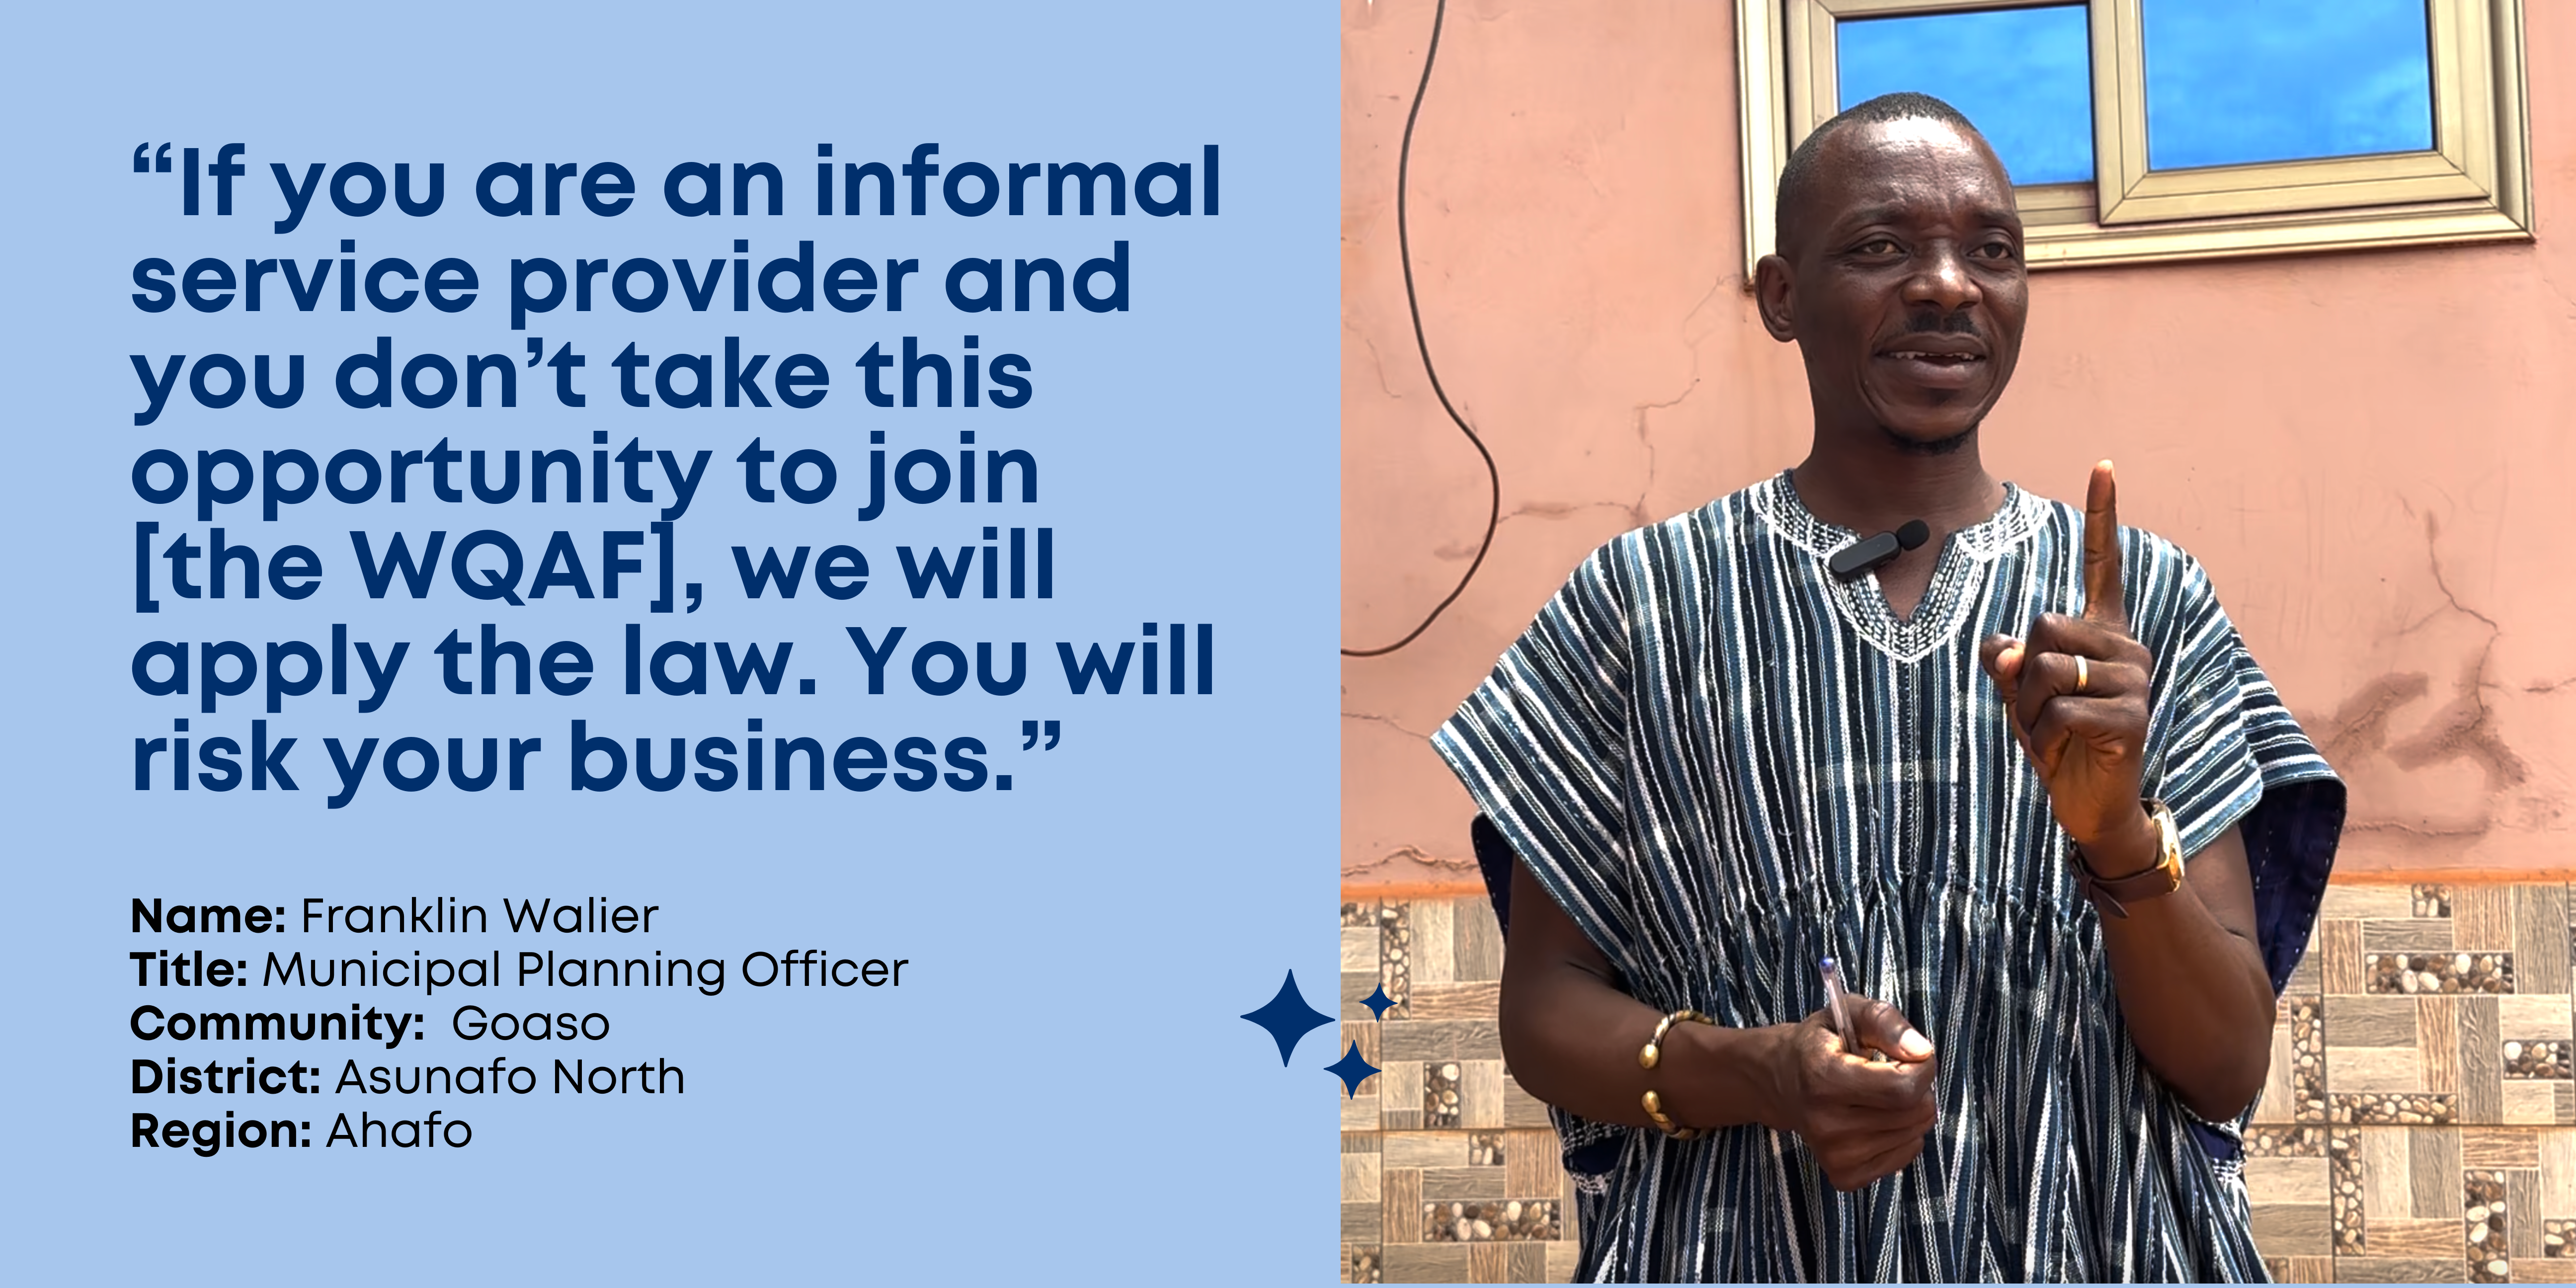  Municipal Planning Officer, Franklin Walier, wears a traditional top with blue and white stripes and gestures with one index finger while speaking: "If you are an informal service provider and you don't take this opportunity to join [the WQAF], we will apply the law. You will risk your business." Asunafo North, Ahafo, Ghana